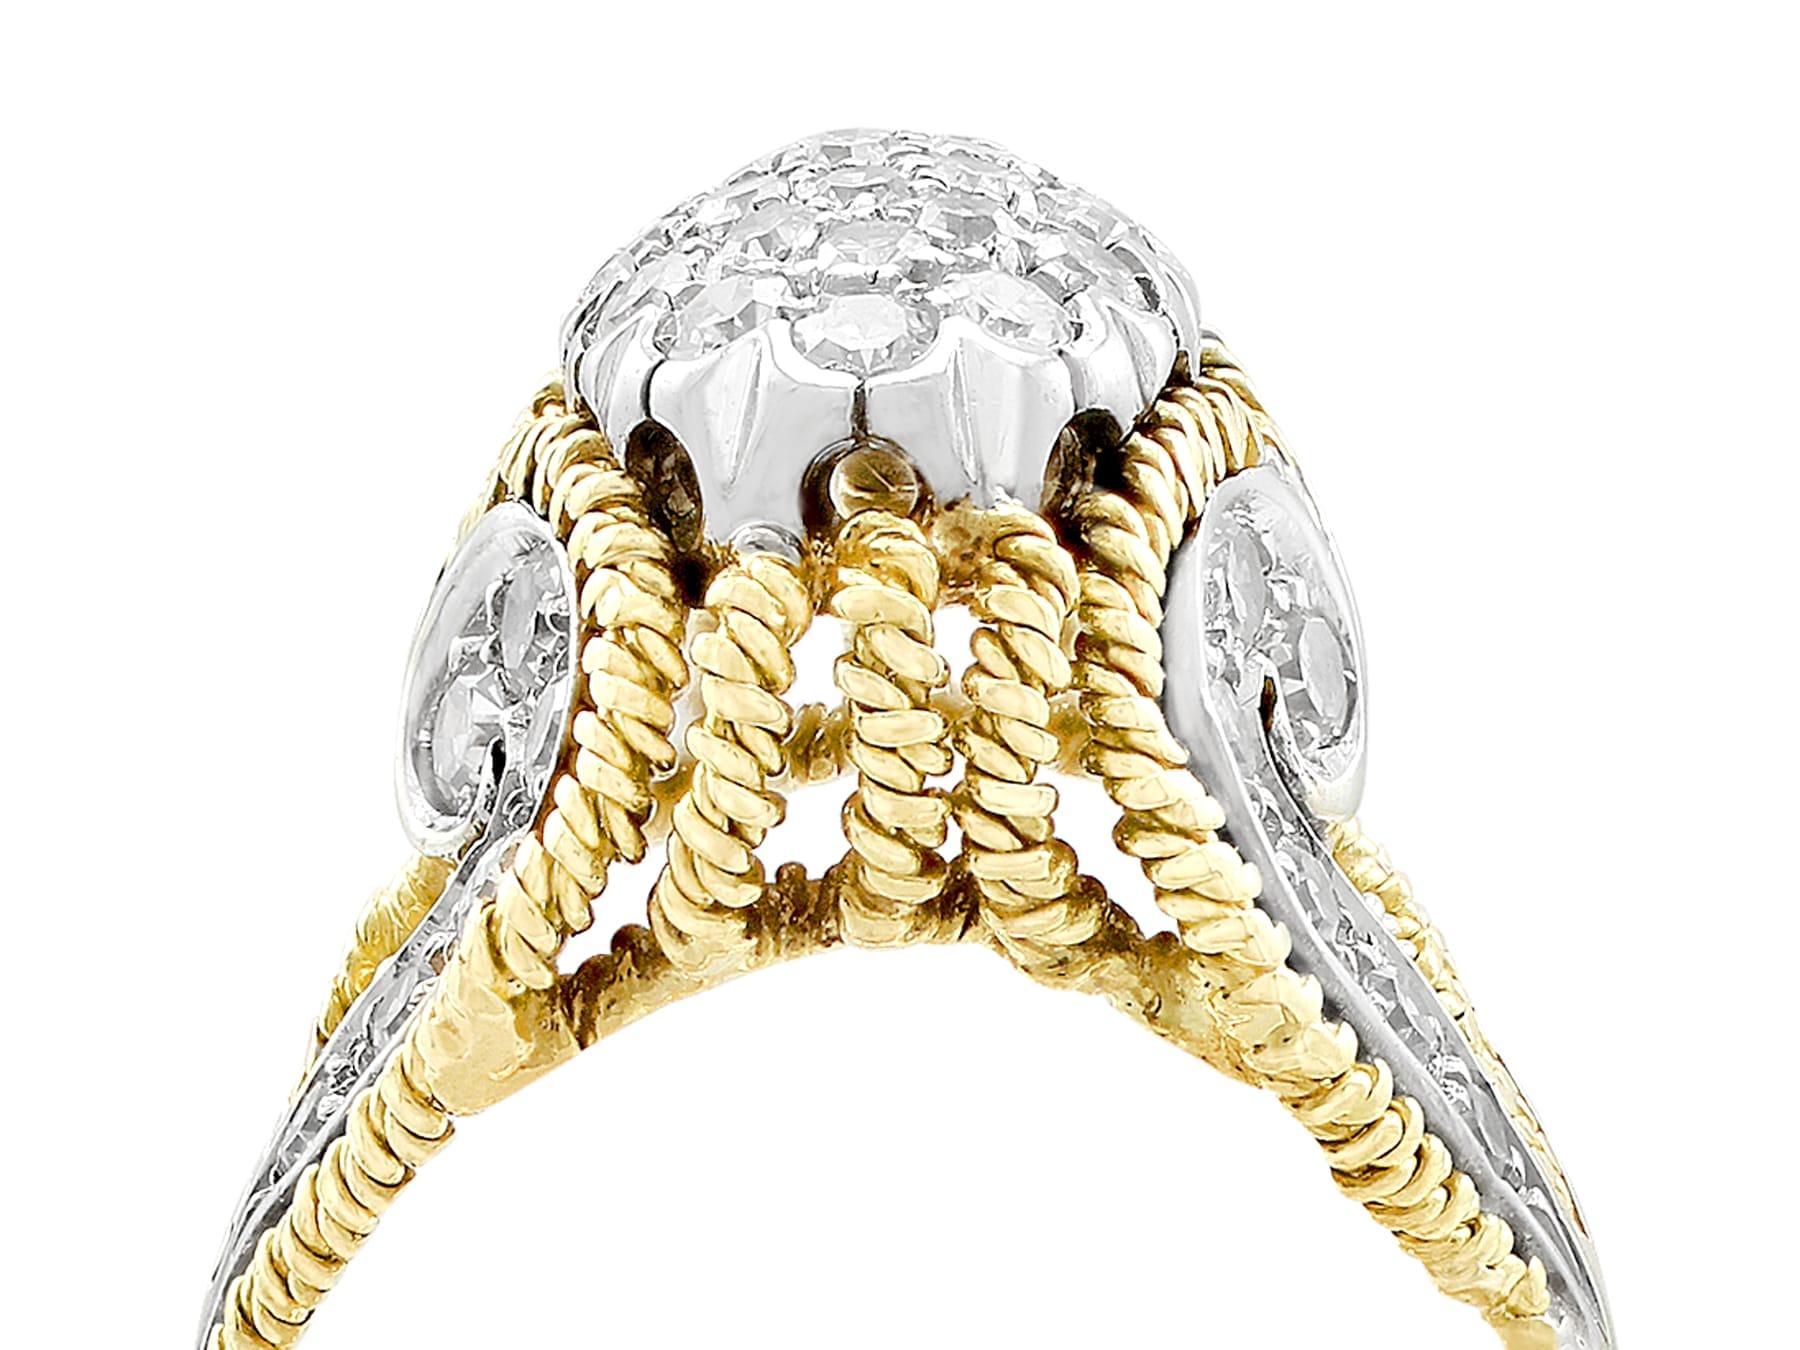 An unusual and impressive vintage Italian 1.12 carat diamond and 18 karat yellow gold, 18 karat white gold set cocktail ring; part of our diverse vintage jewelry collections.

This fine, impressive and unusual vintage diamond ring has been crafted